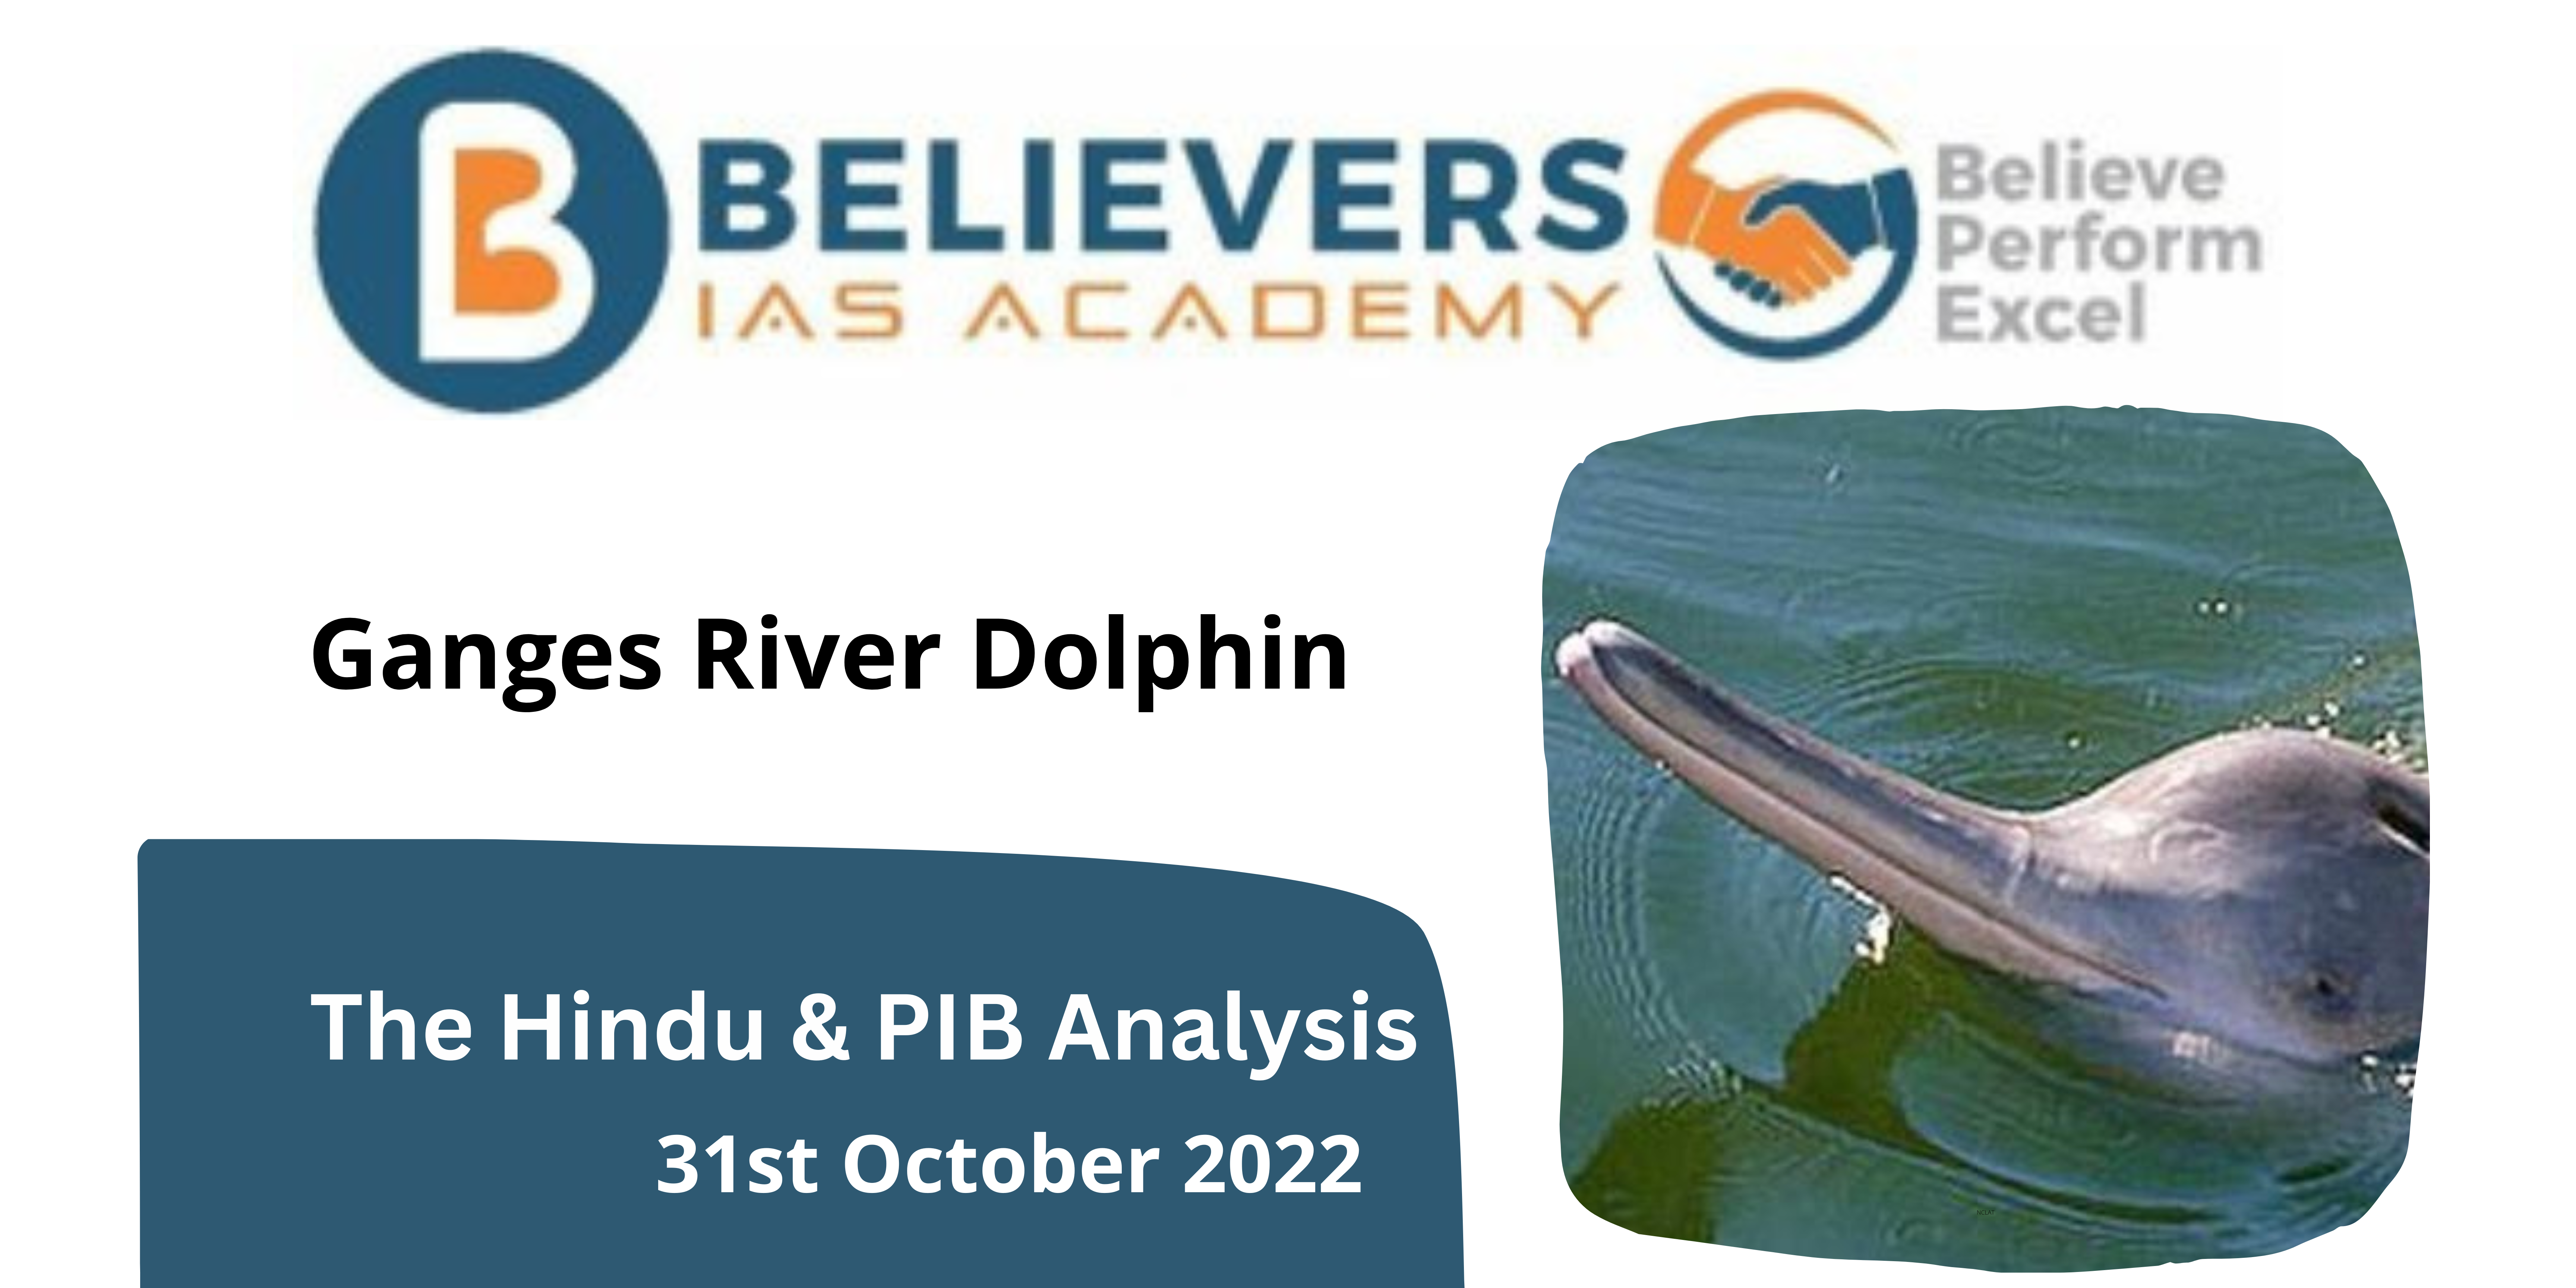 Ganges River Dolphin - Believers IAS Academy